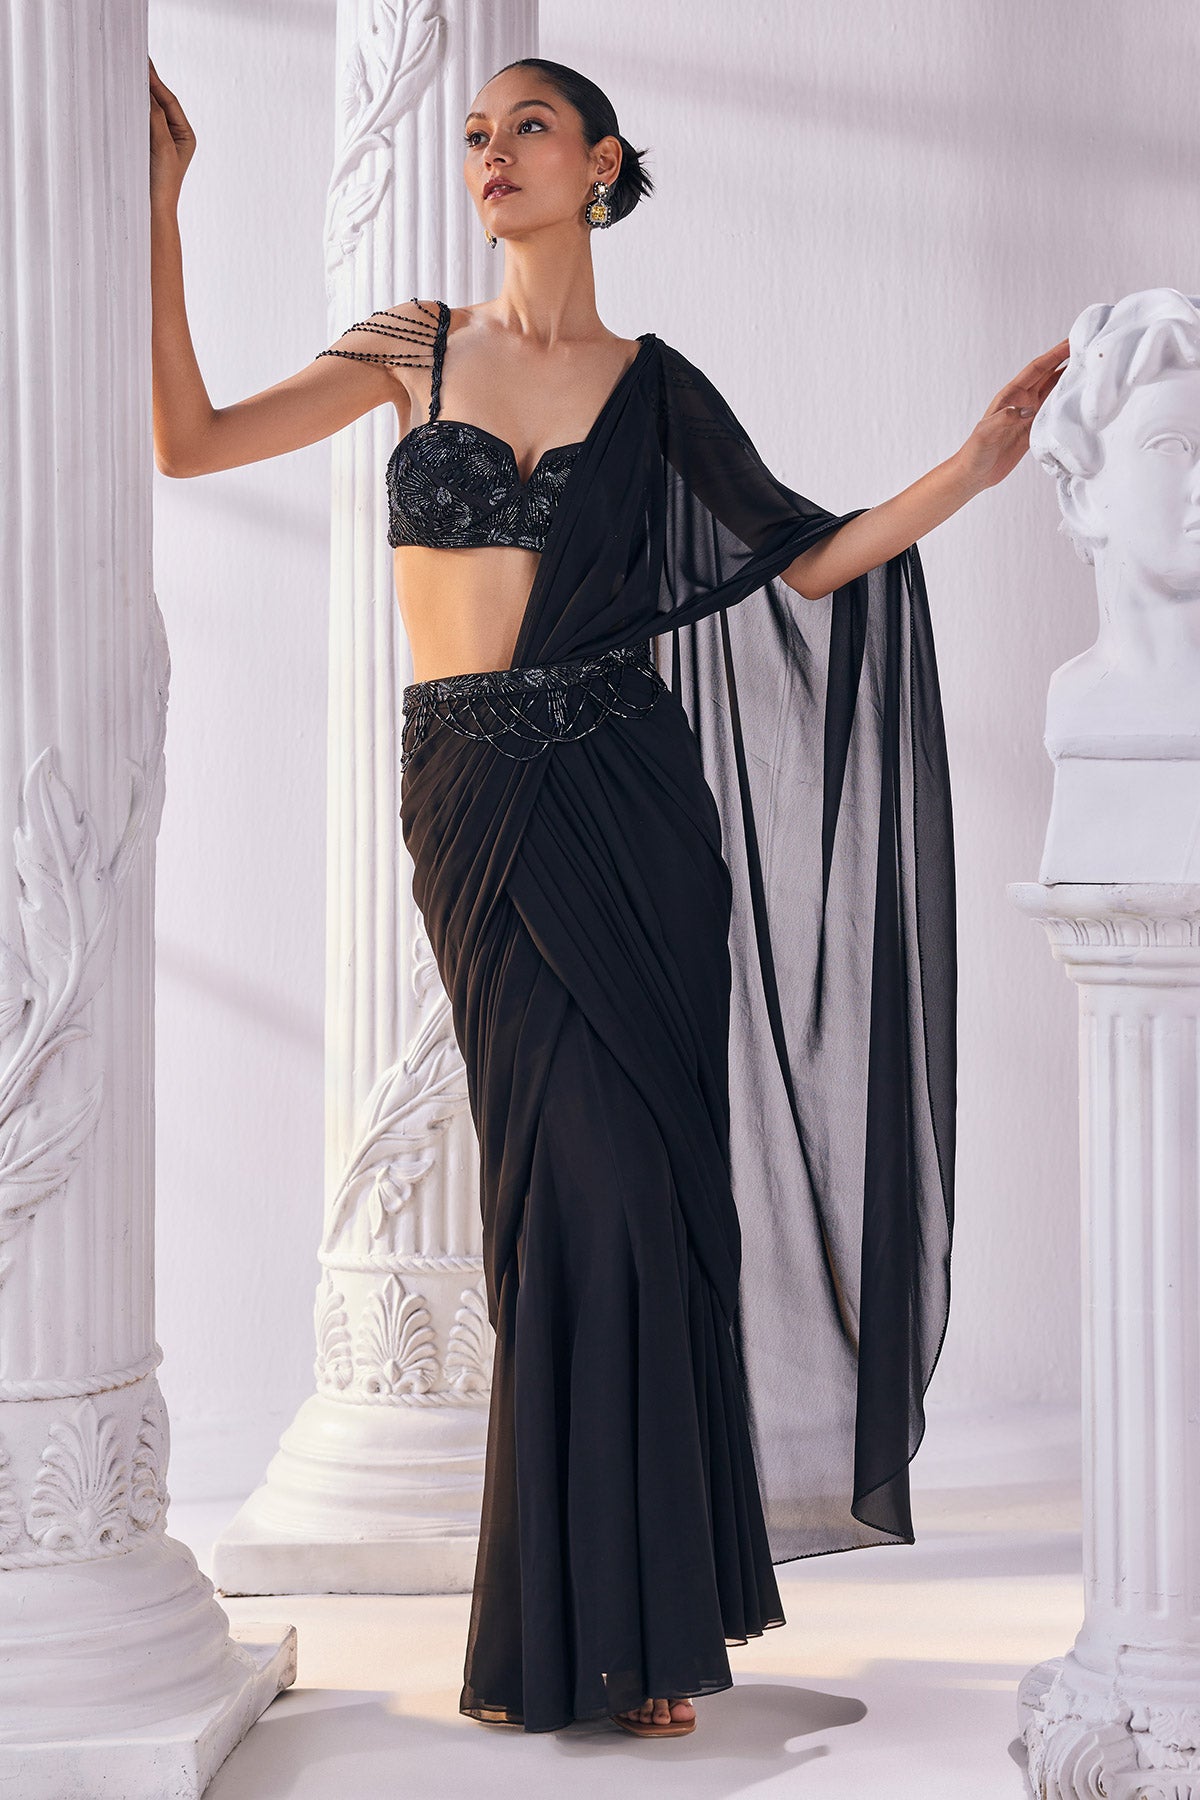 Draped Saree In Royal Georgette Fabric Designed With An Embroidered Bustier And A Statement Belt.